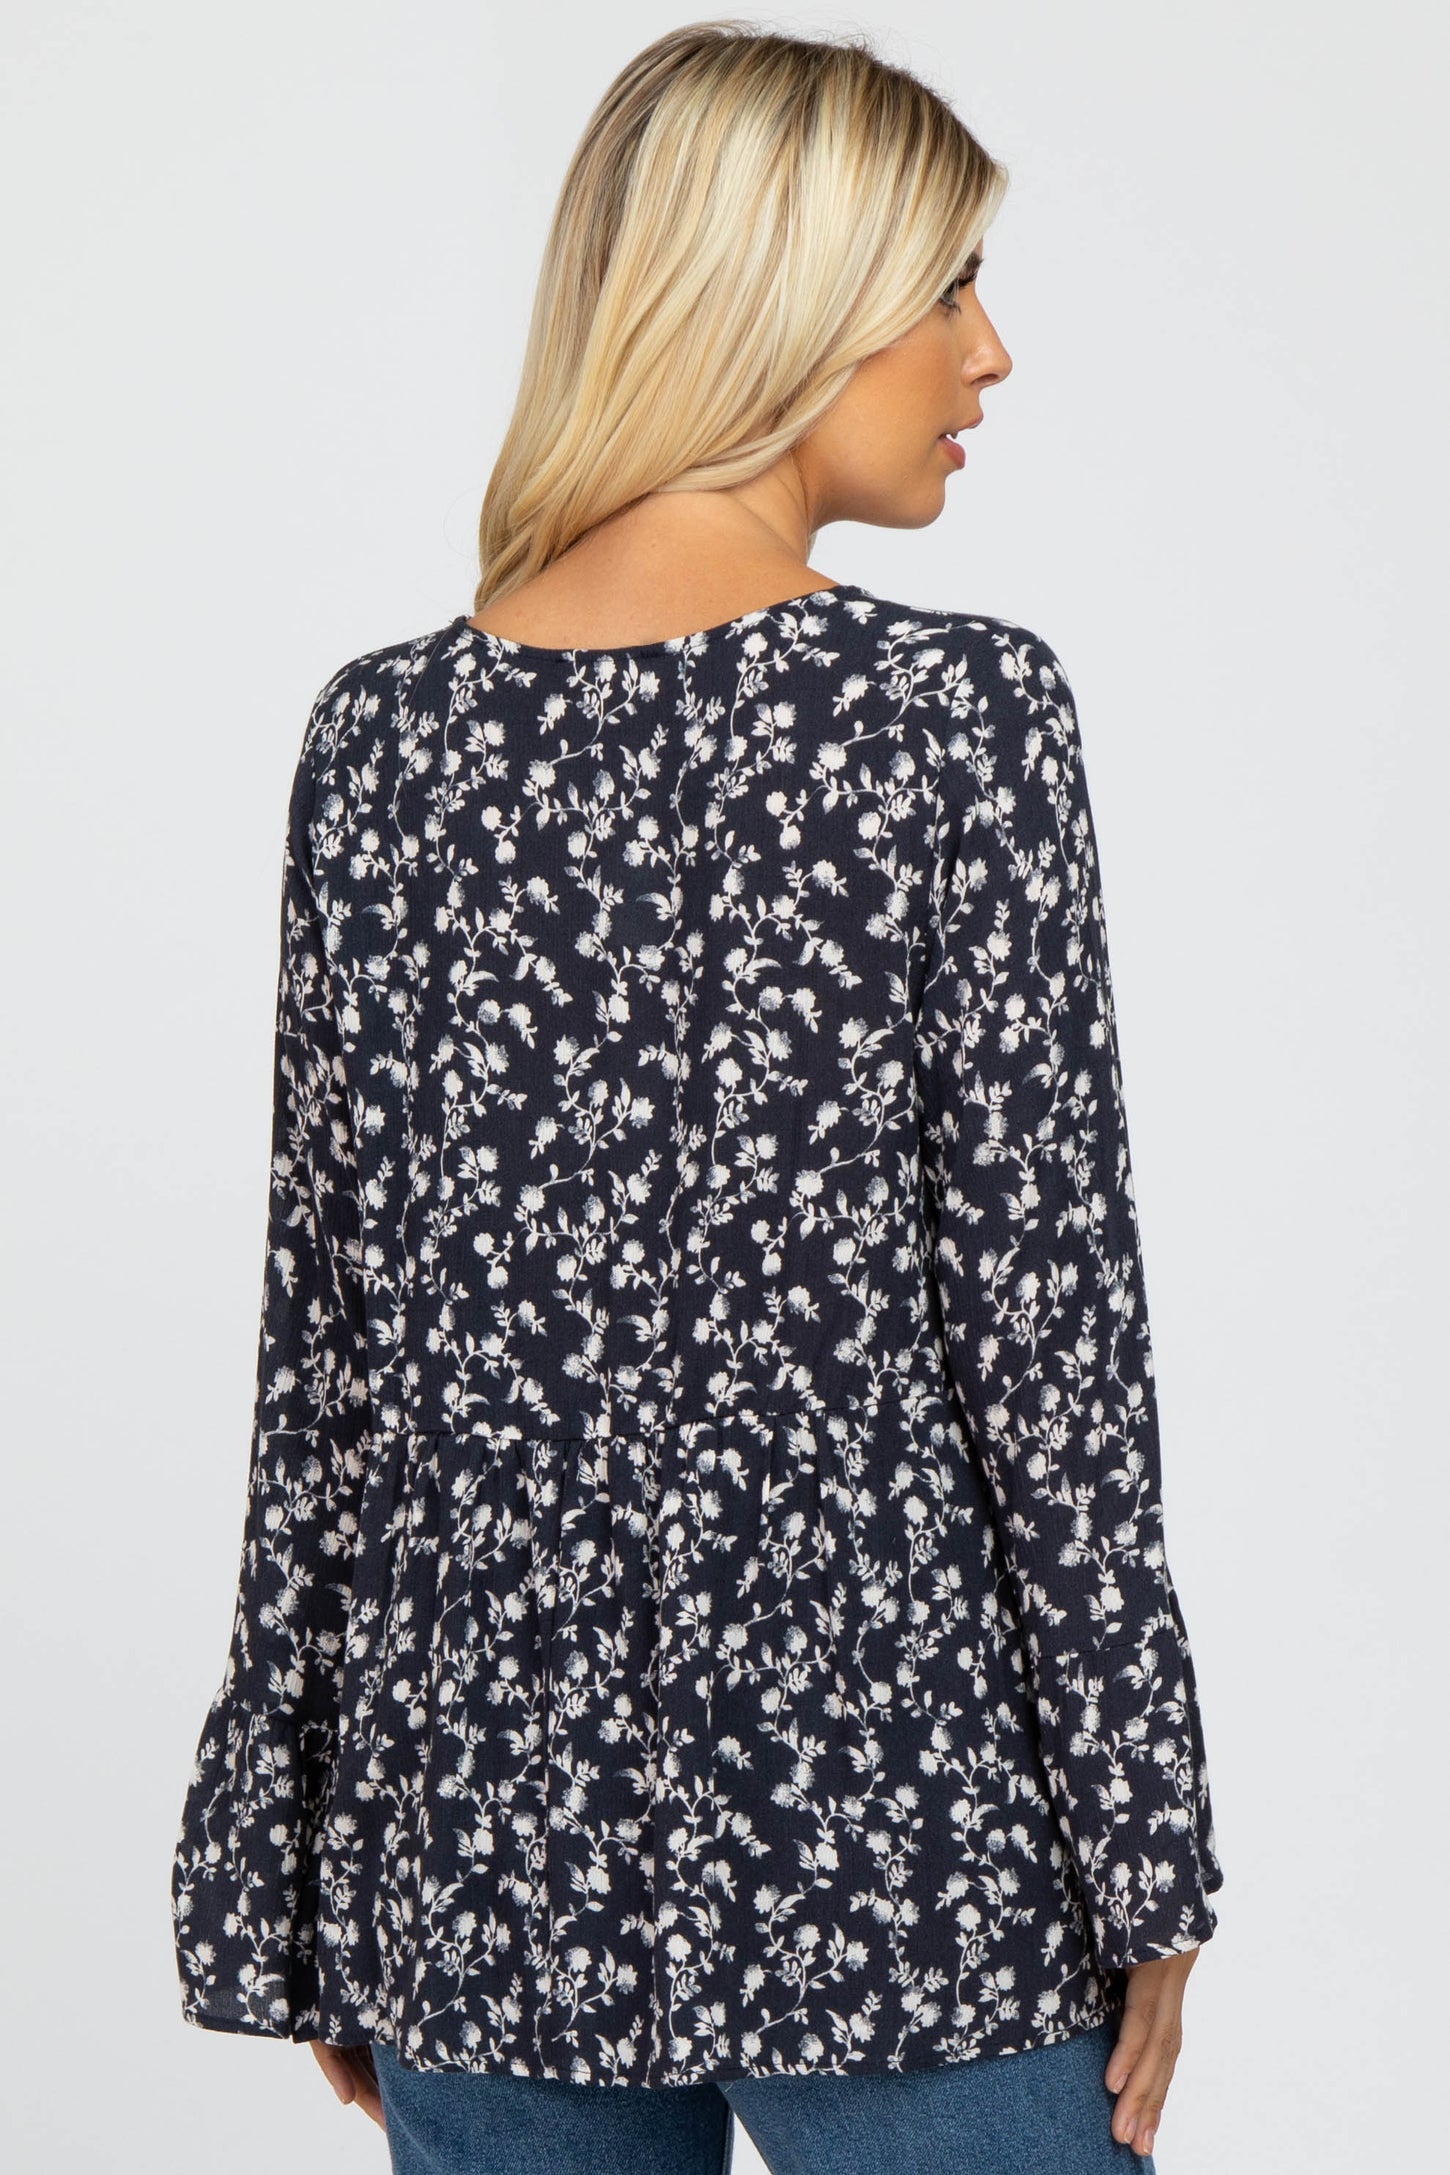 Navy Blue Floral Bell Sleeve Top